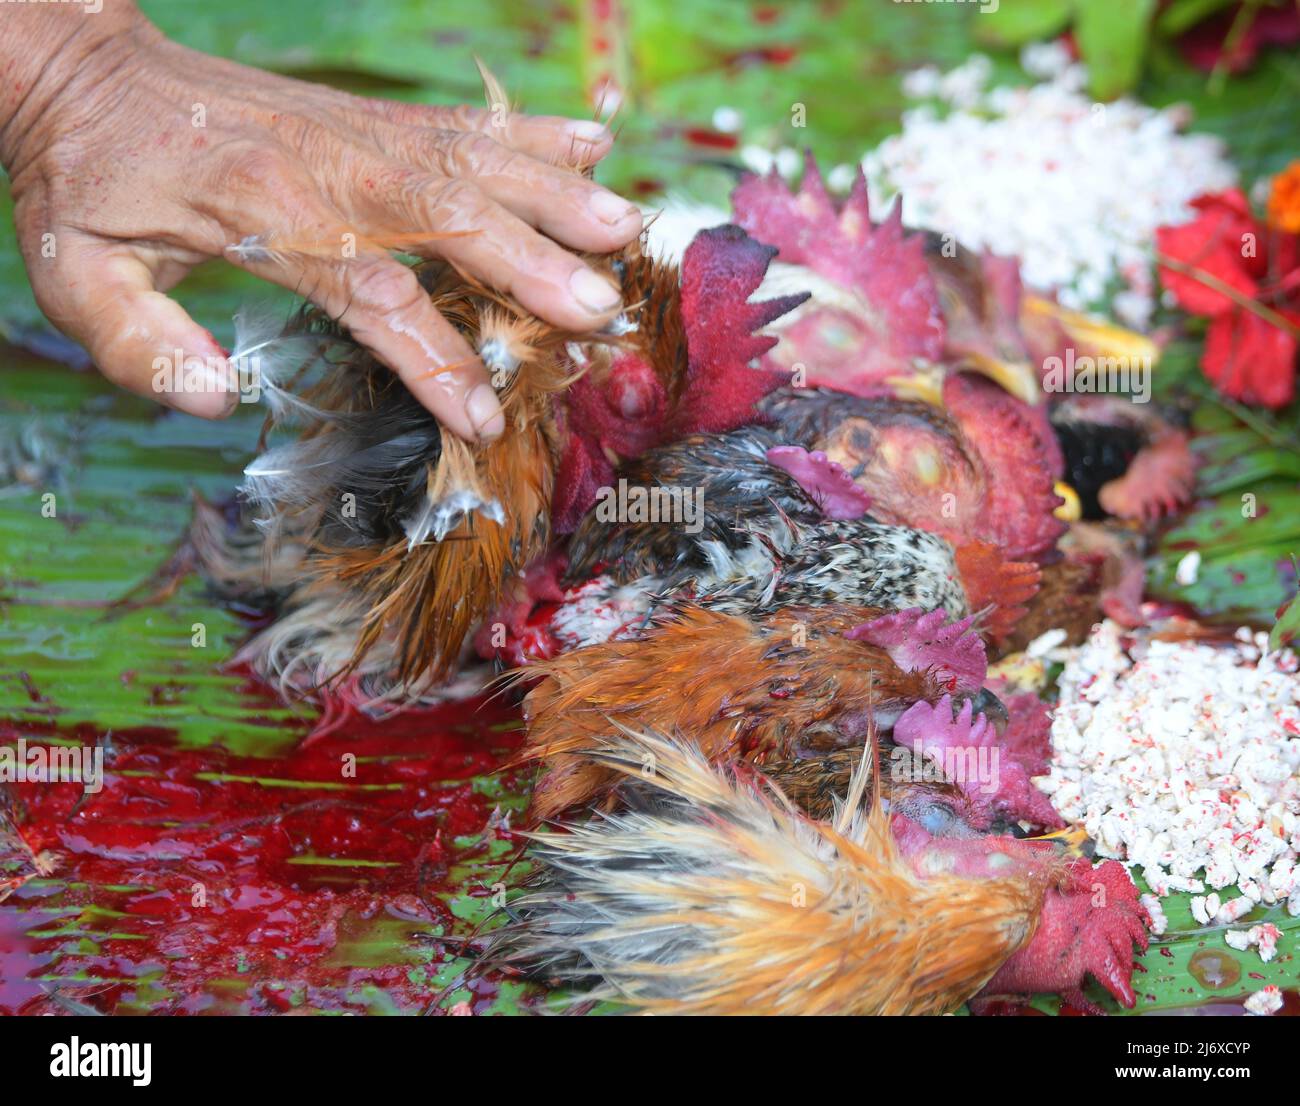 Hindu priest sacrifice chickens during a ritual in front of the tribal deity 'Garia' during the Garia Puja festival. A three-day festival to honour the deity garia is held annually on the first day of the Hindu calendar month of 'Vaisakh' (mid-April). Agartala, Tripura, India. Stock Photo